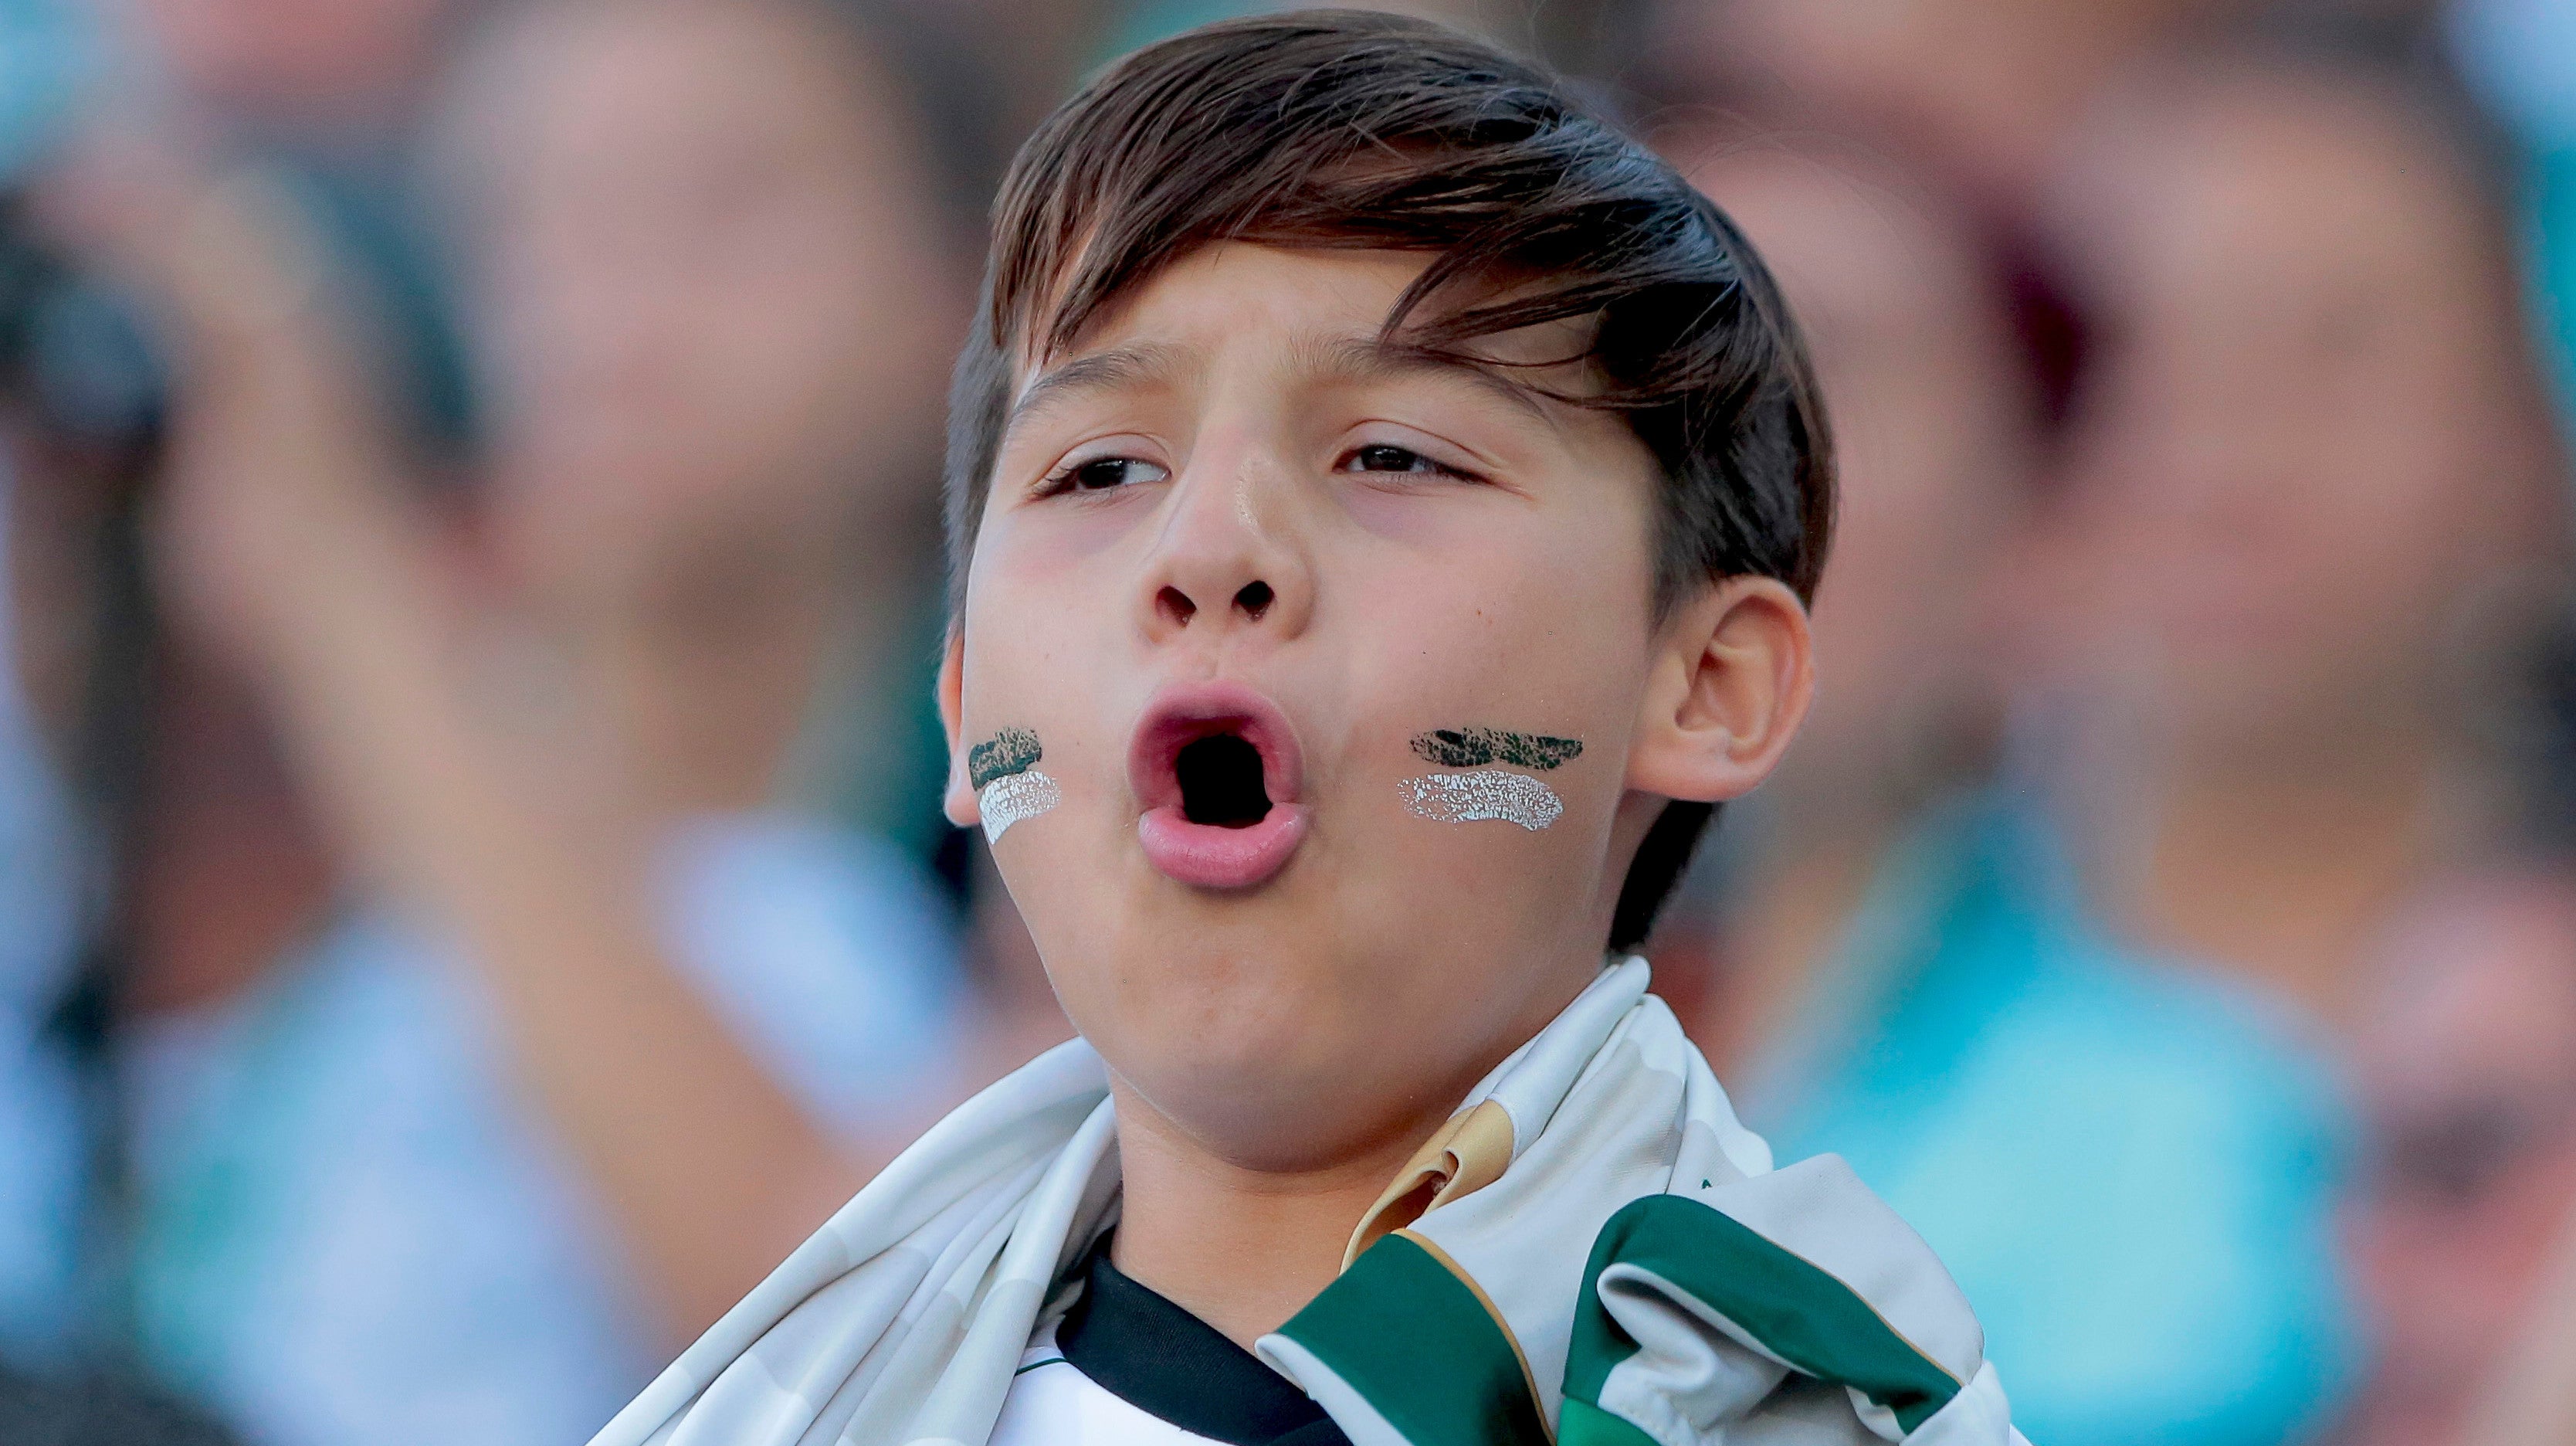 How To Get Your Kid Devoted To Your Favourite Sports Team